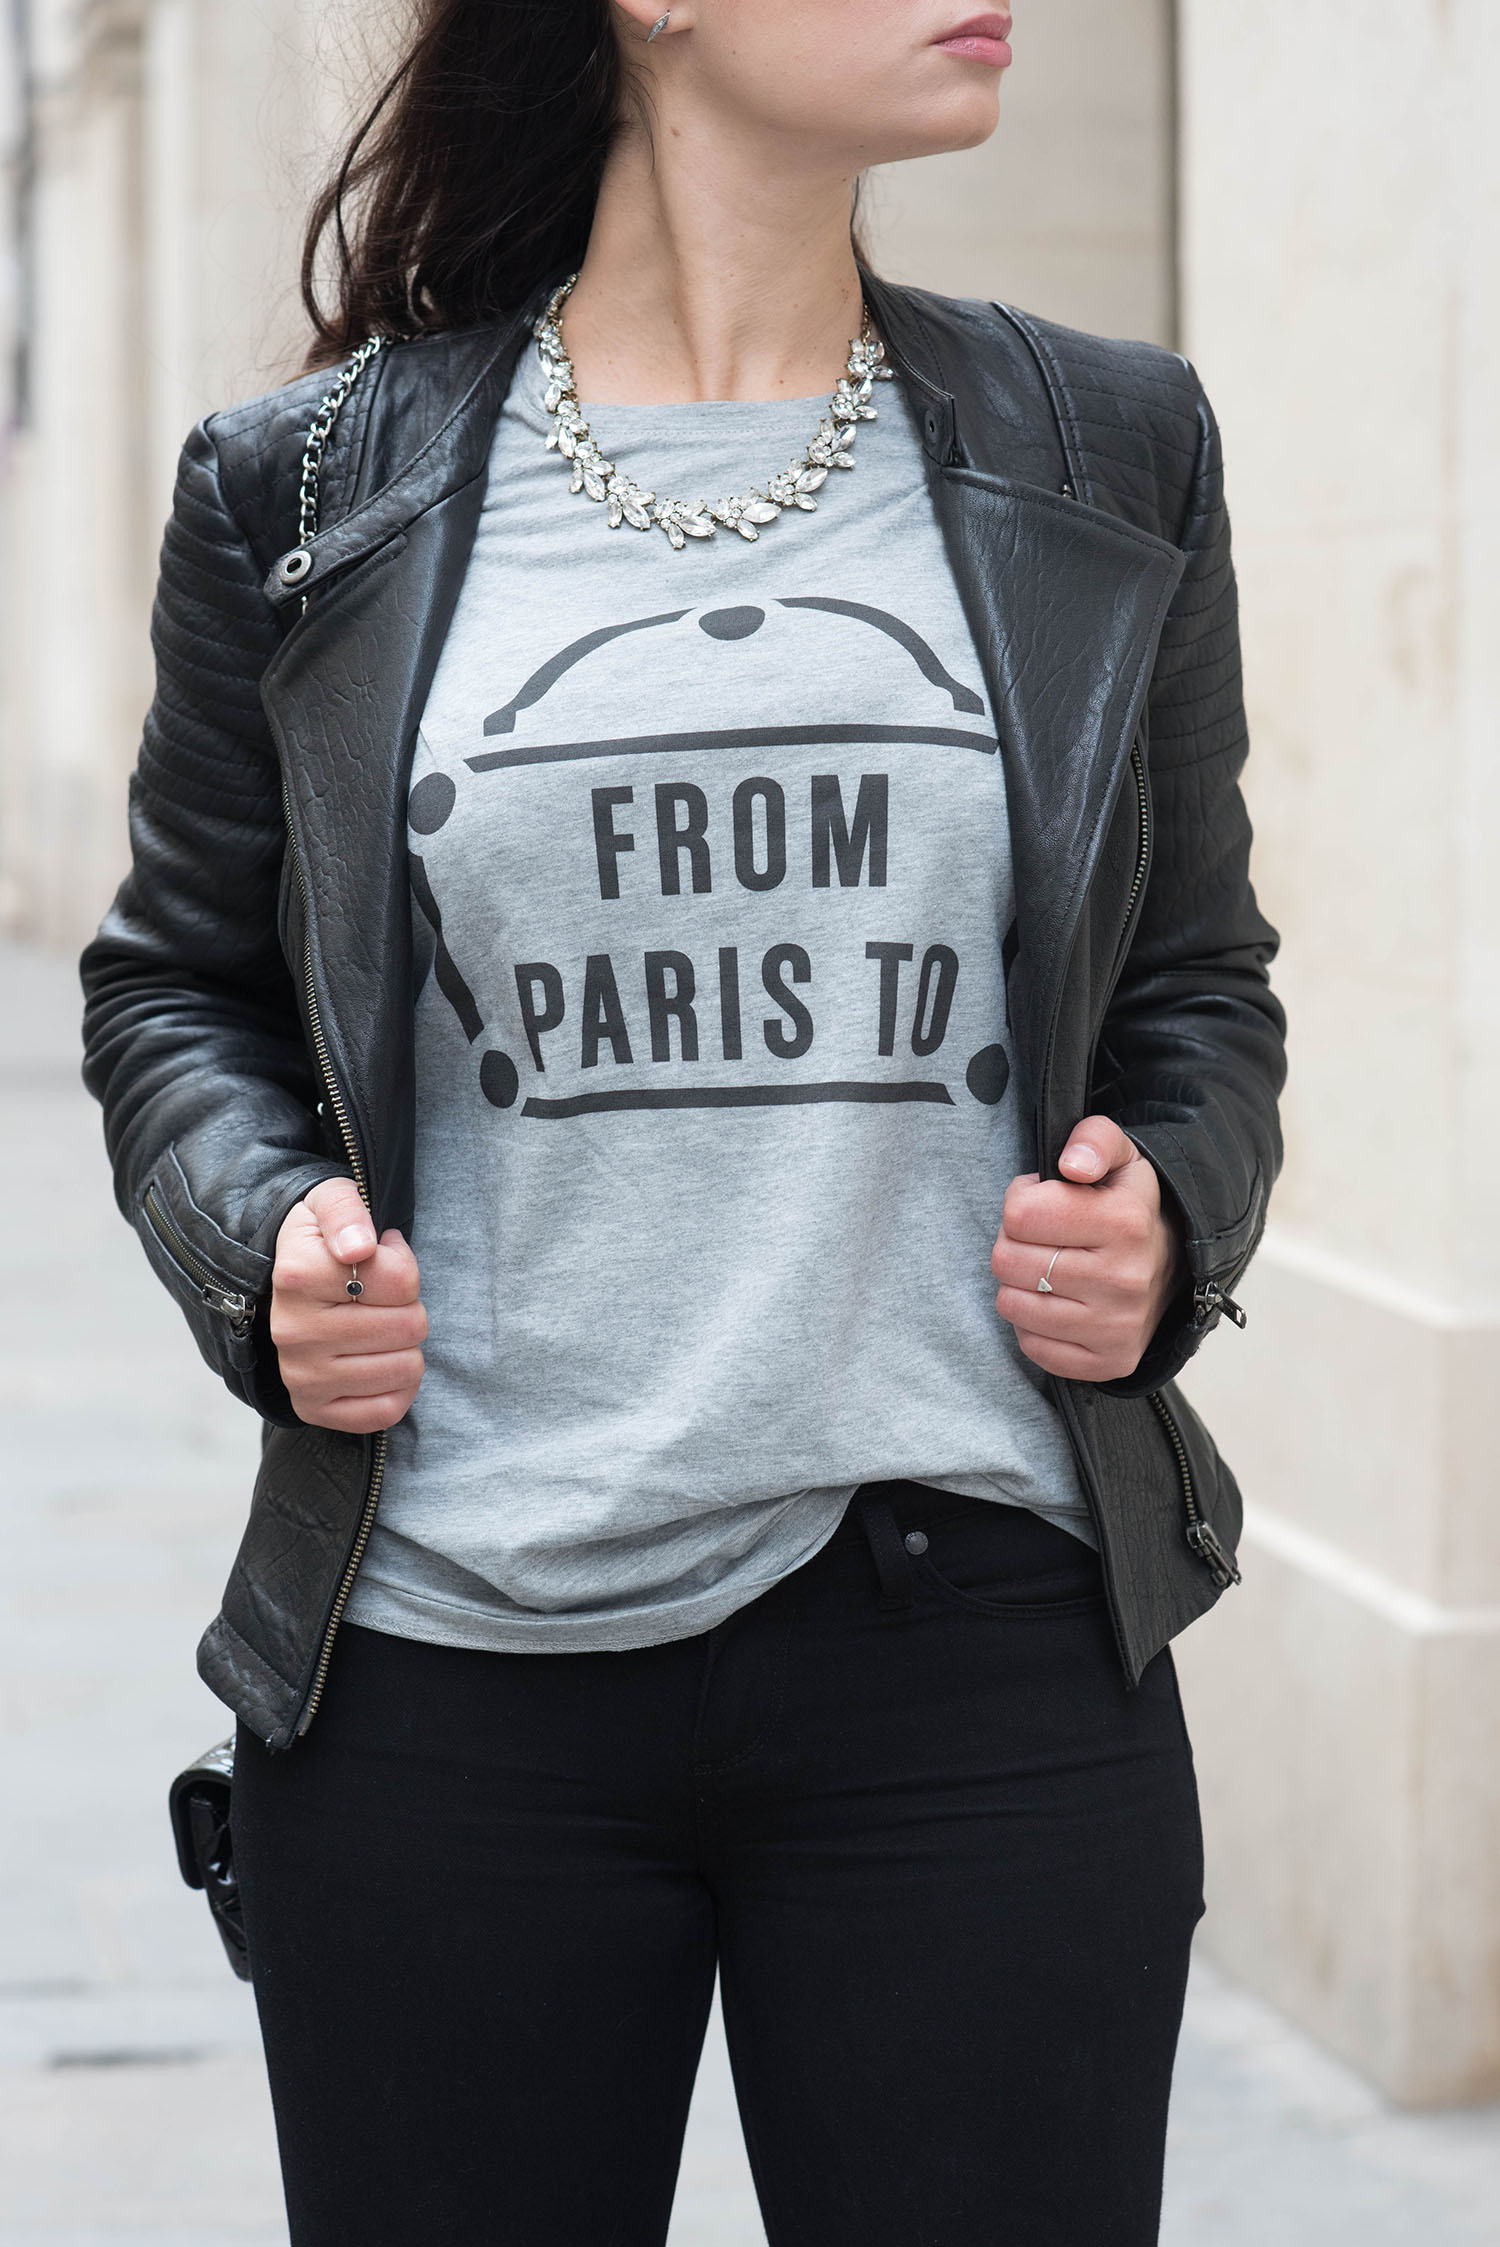 Outfit details on fashion blogger Cee Fardoe of Coco & Vera, including a Floriane Fosso From Paris To t-shirt and Olive + Piper Lucy crystal collar